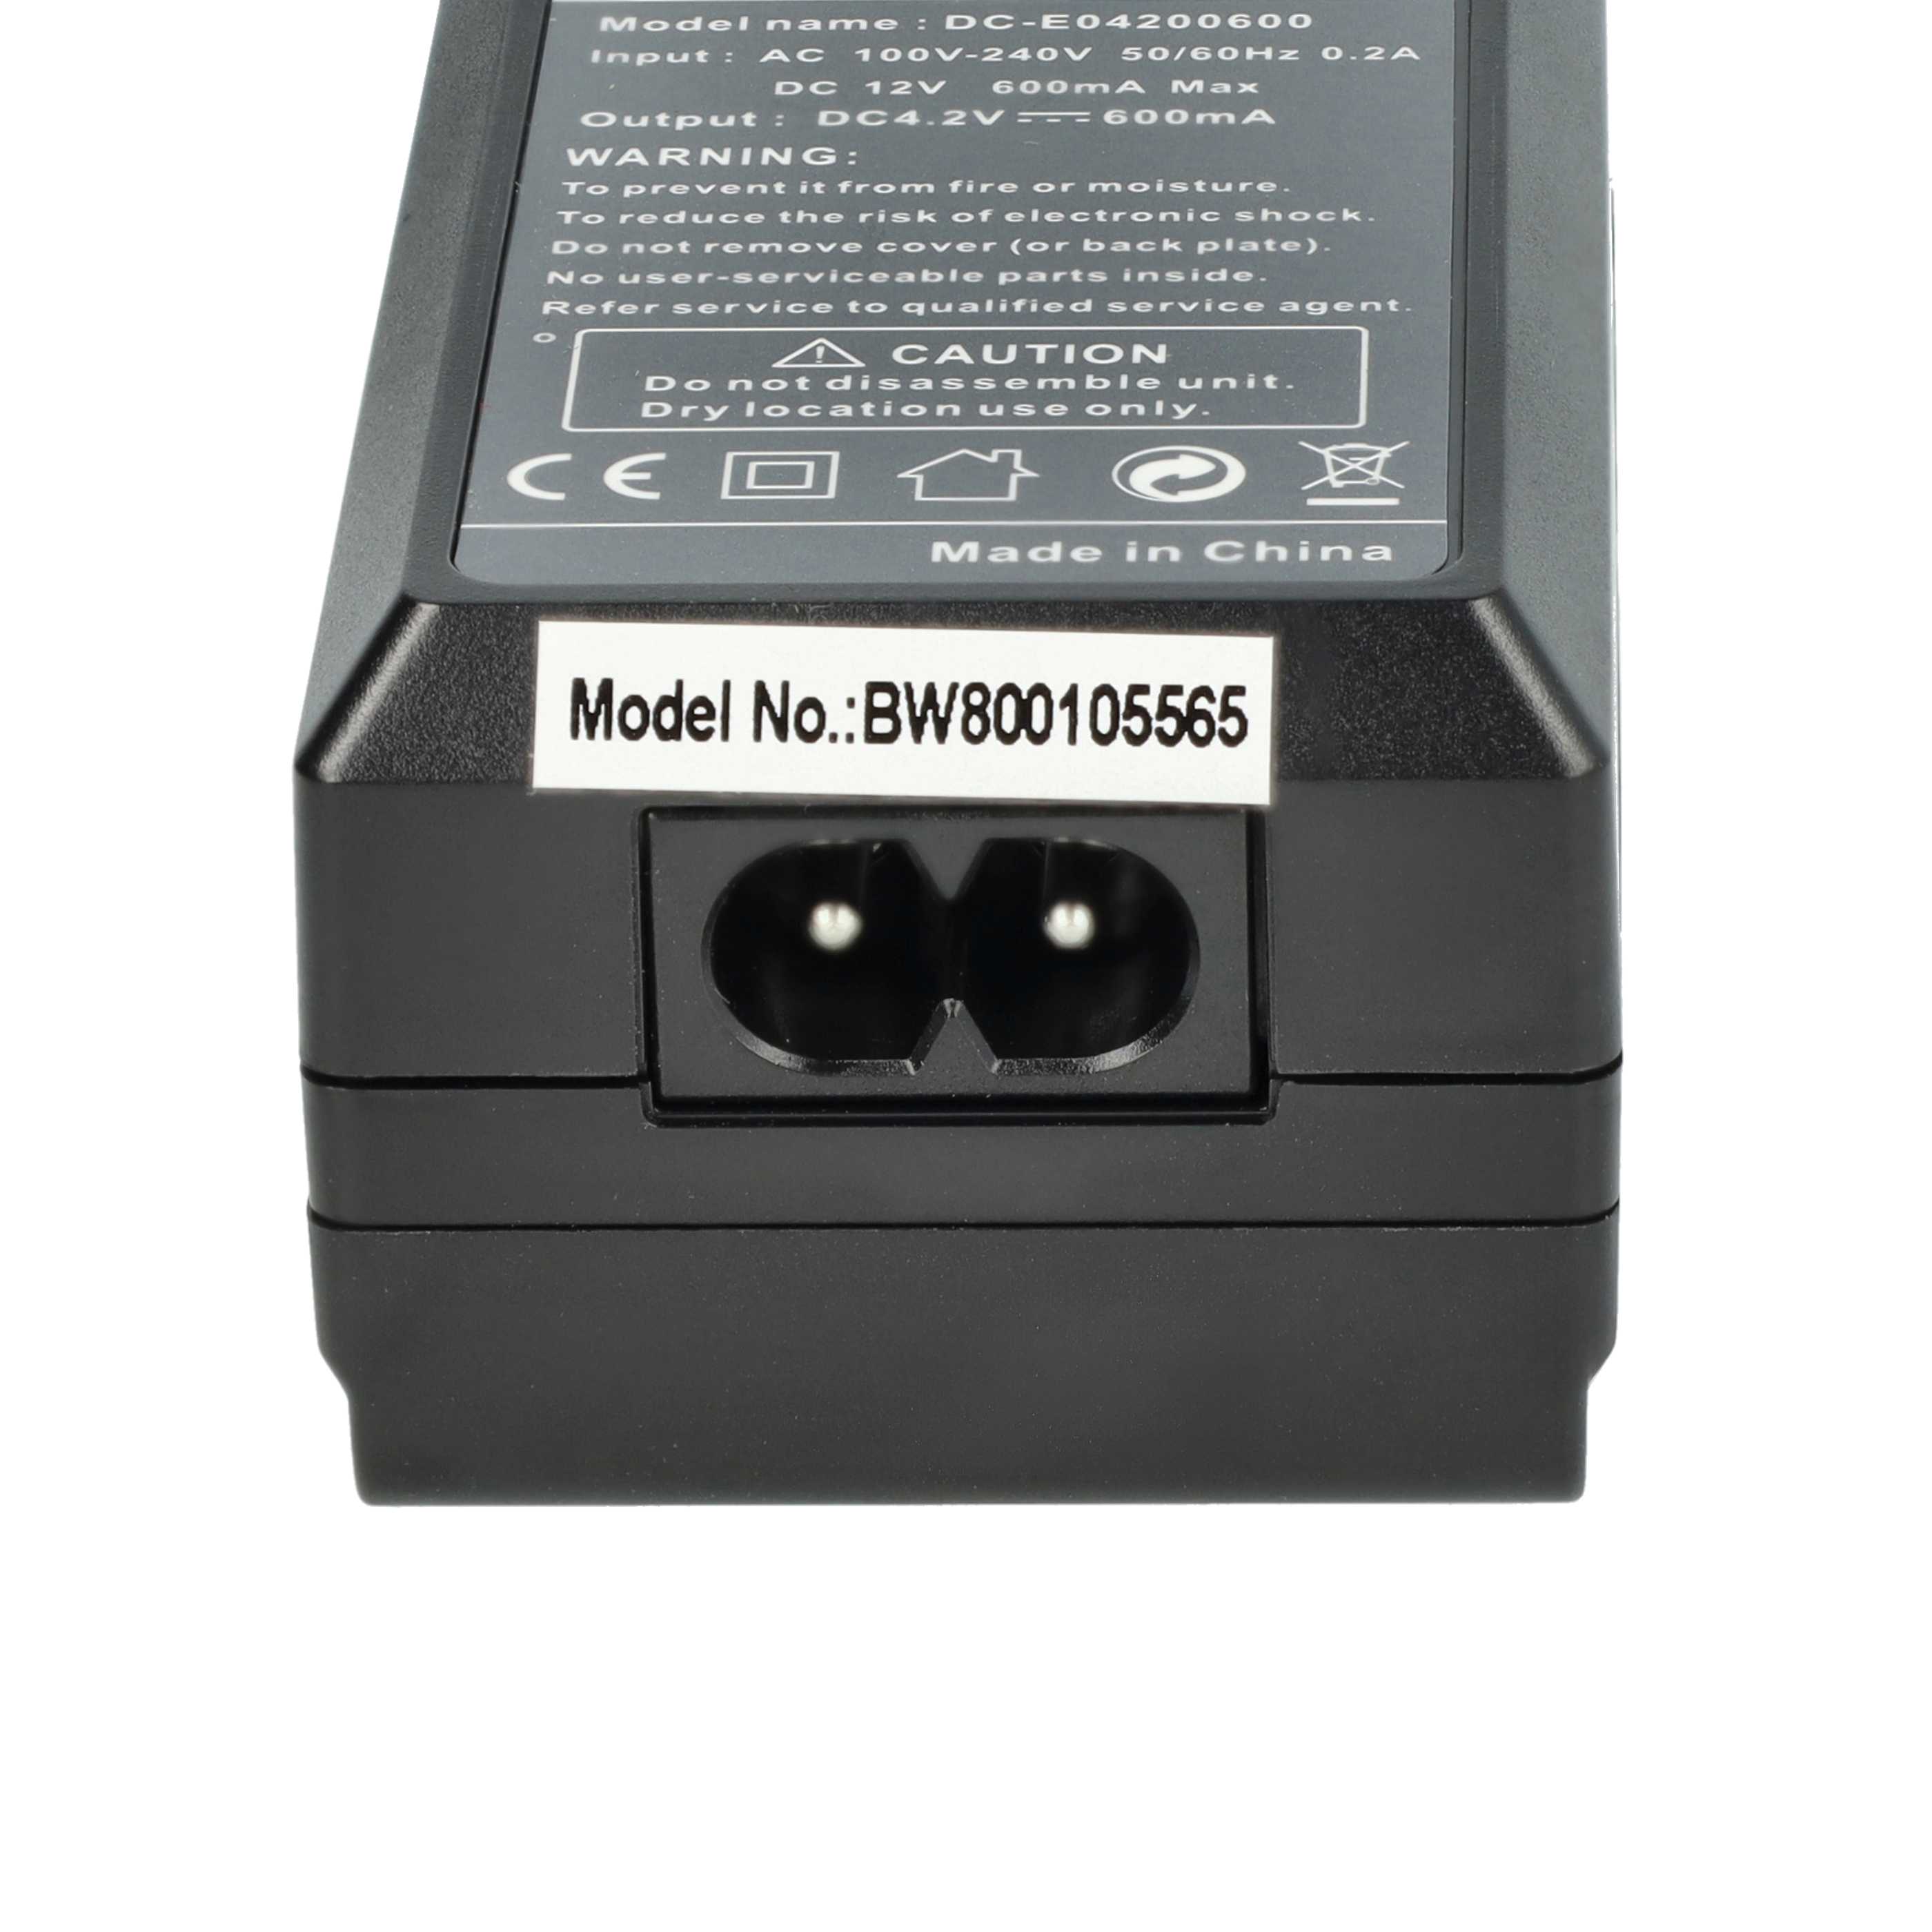 Battery Charger suitable for C Camera etc. - 0.6 A, 4.2 V